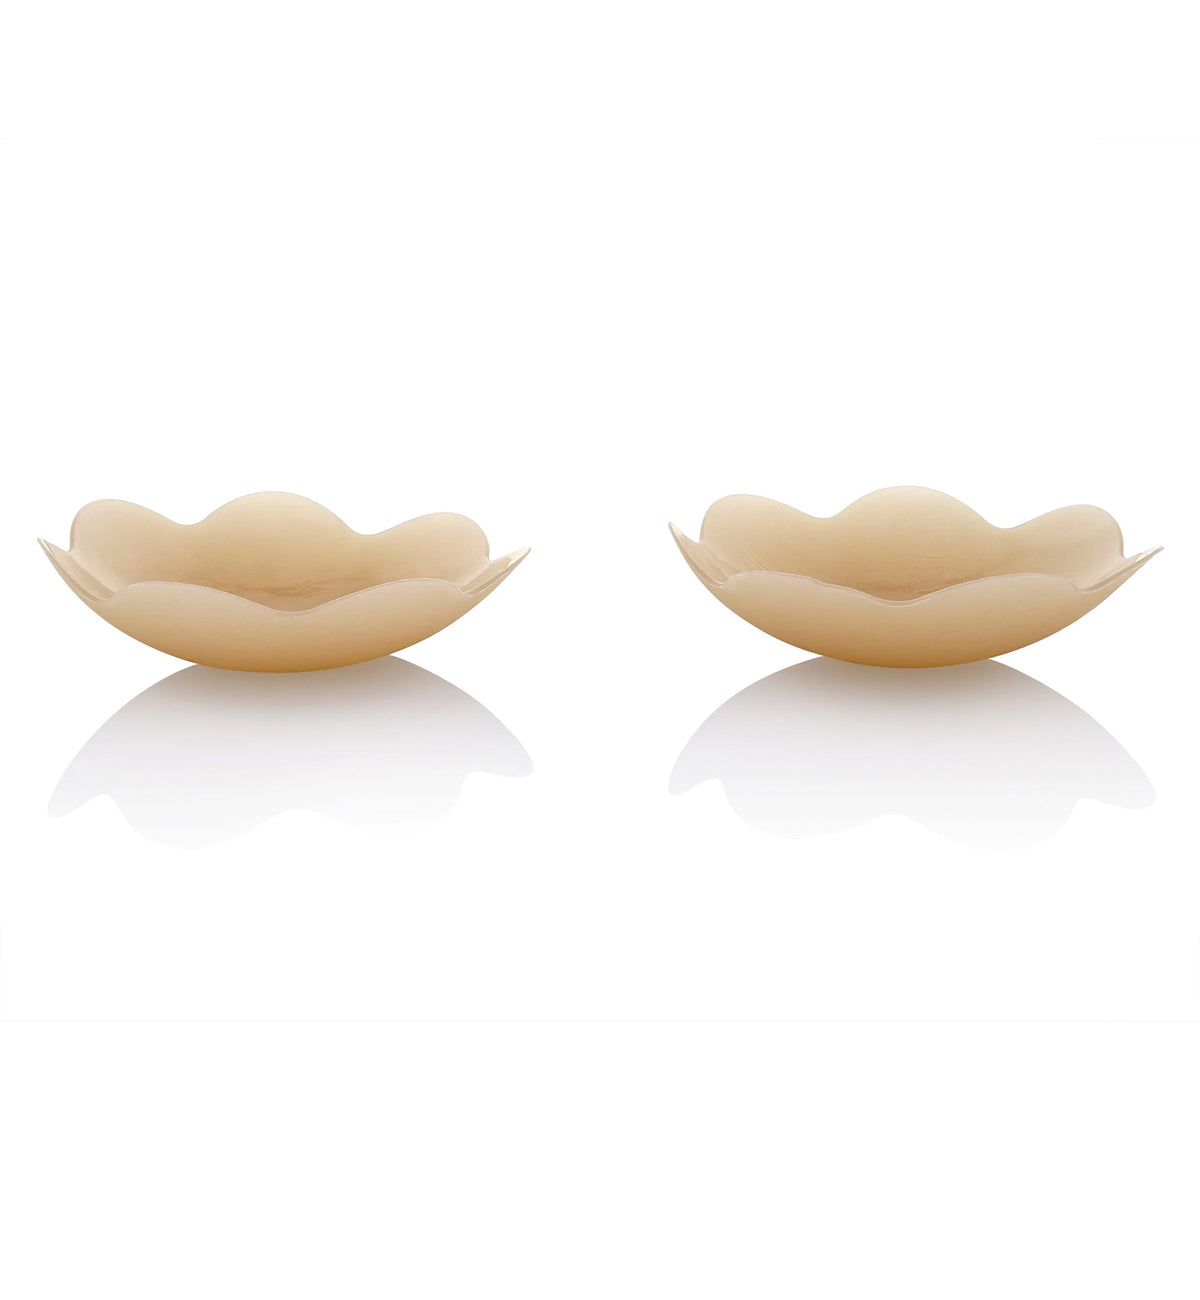 NOOD No-Show Nipple Covers,Nood 5 - Nood 5,One Size